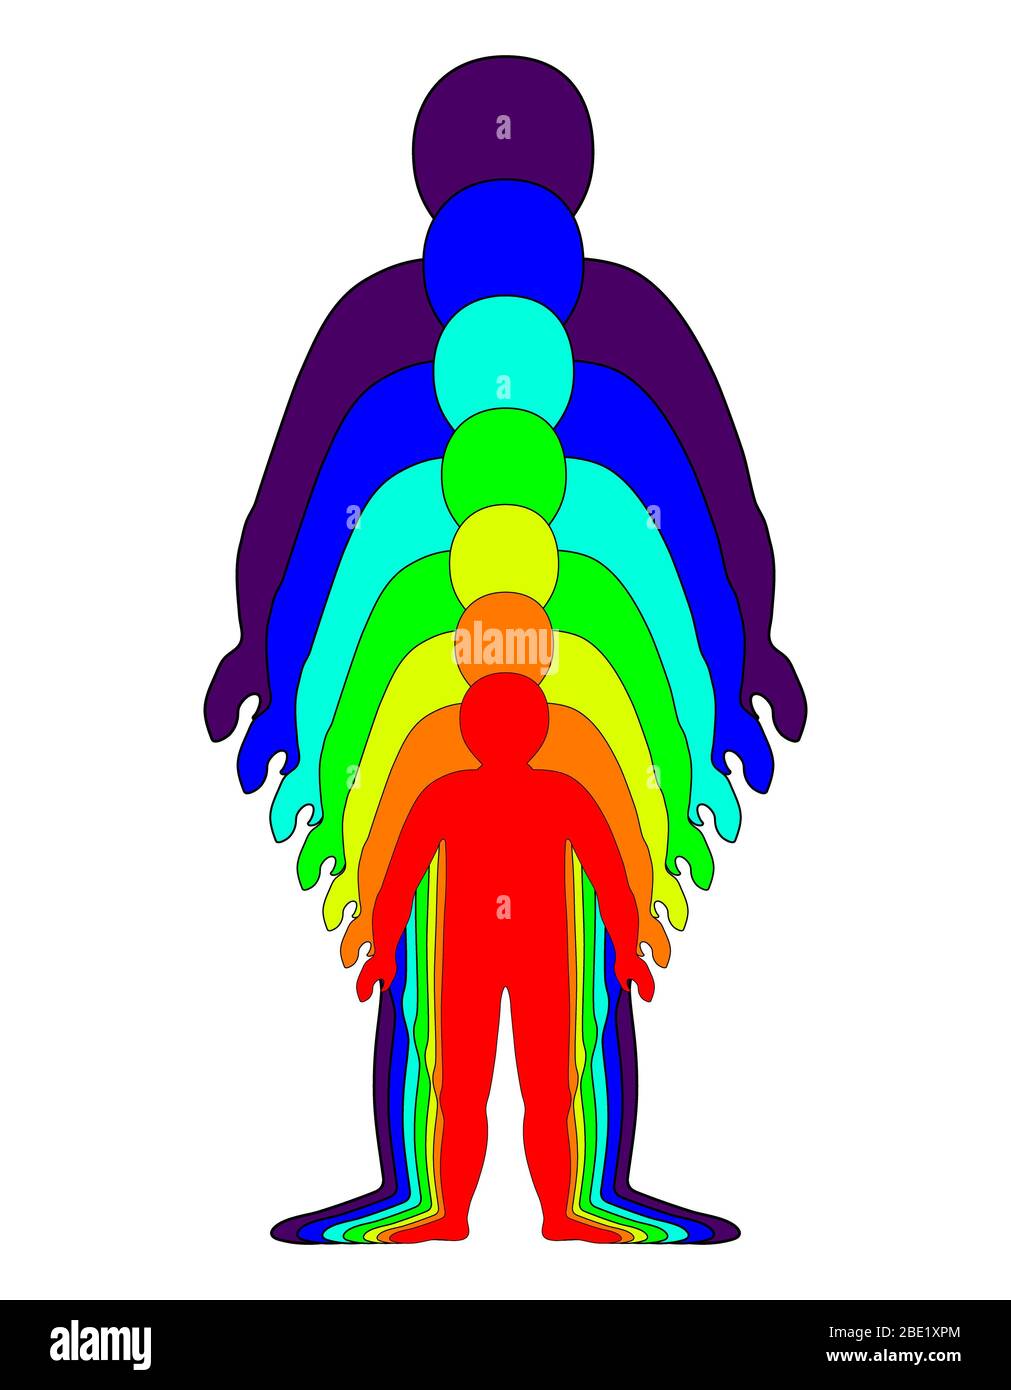 Spiritual growth, Rainbow color marked layers of the male body. The etheric, emotional, metallic, astral, celestial, and causal layers. illustration Stock Photo